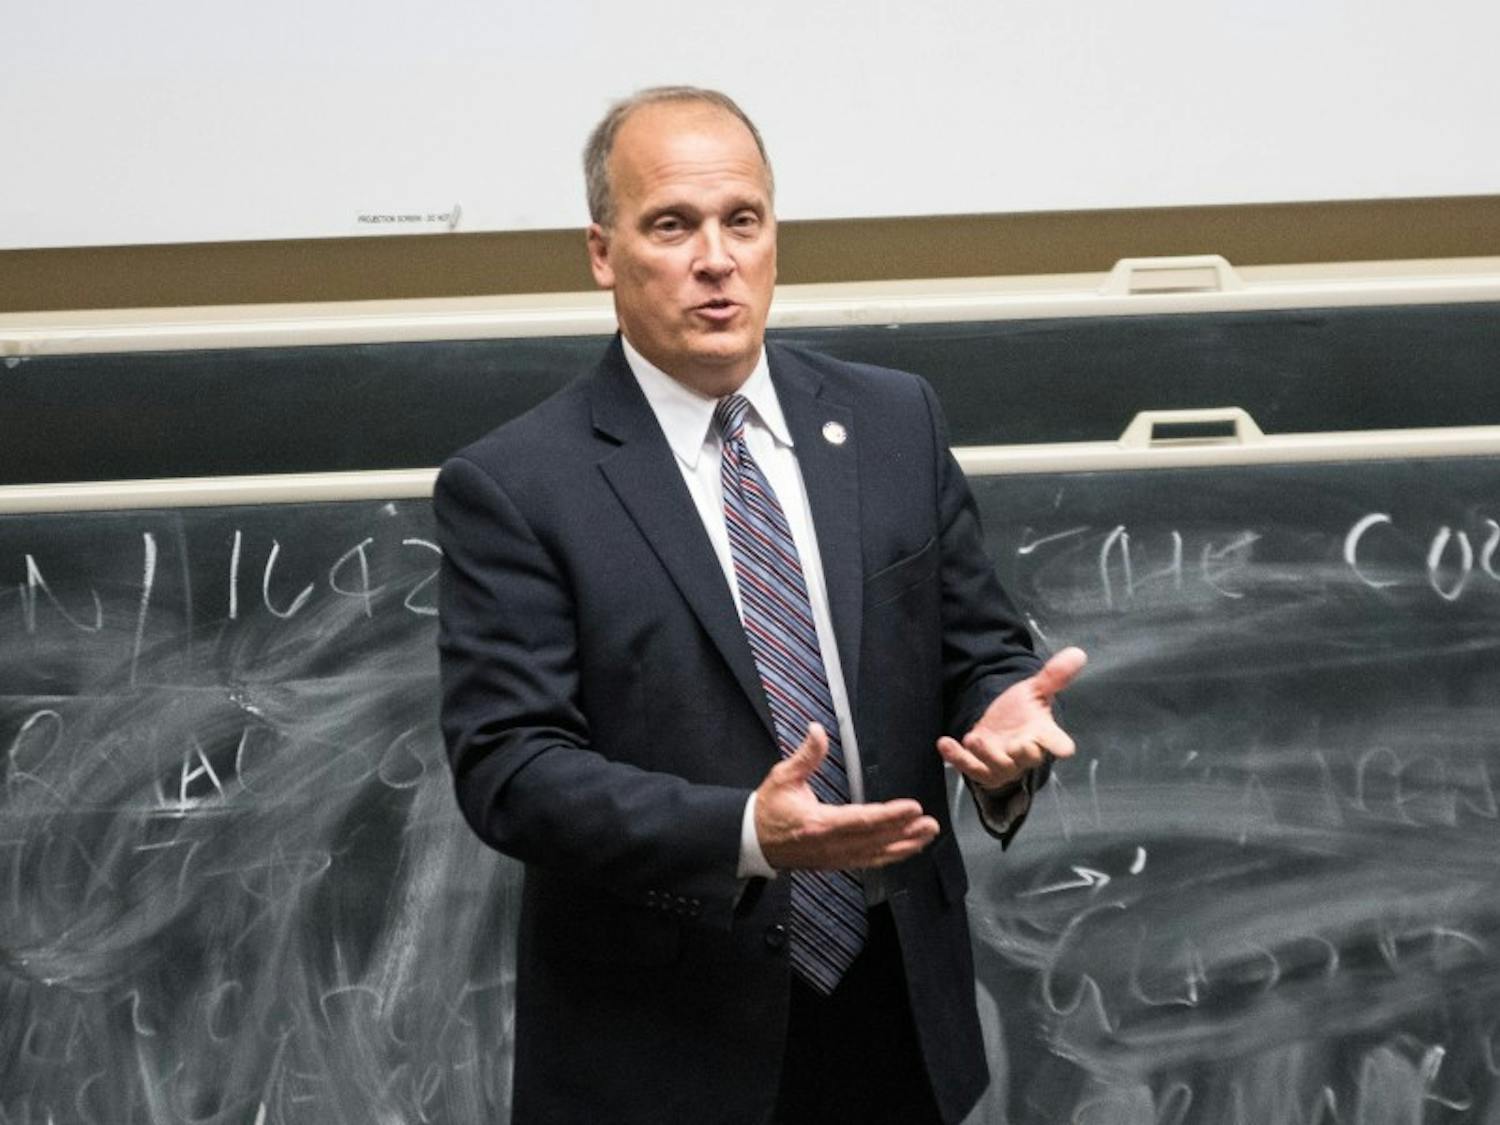 State Attorney General Brad Schimel came to campus Tuesday to speak with College Republicans.